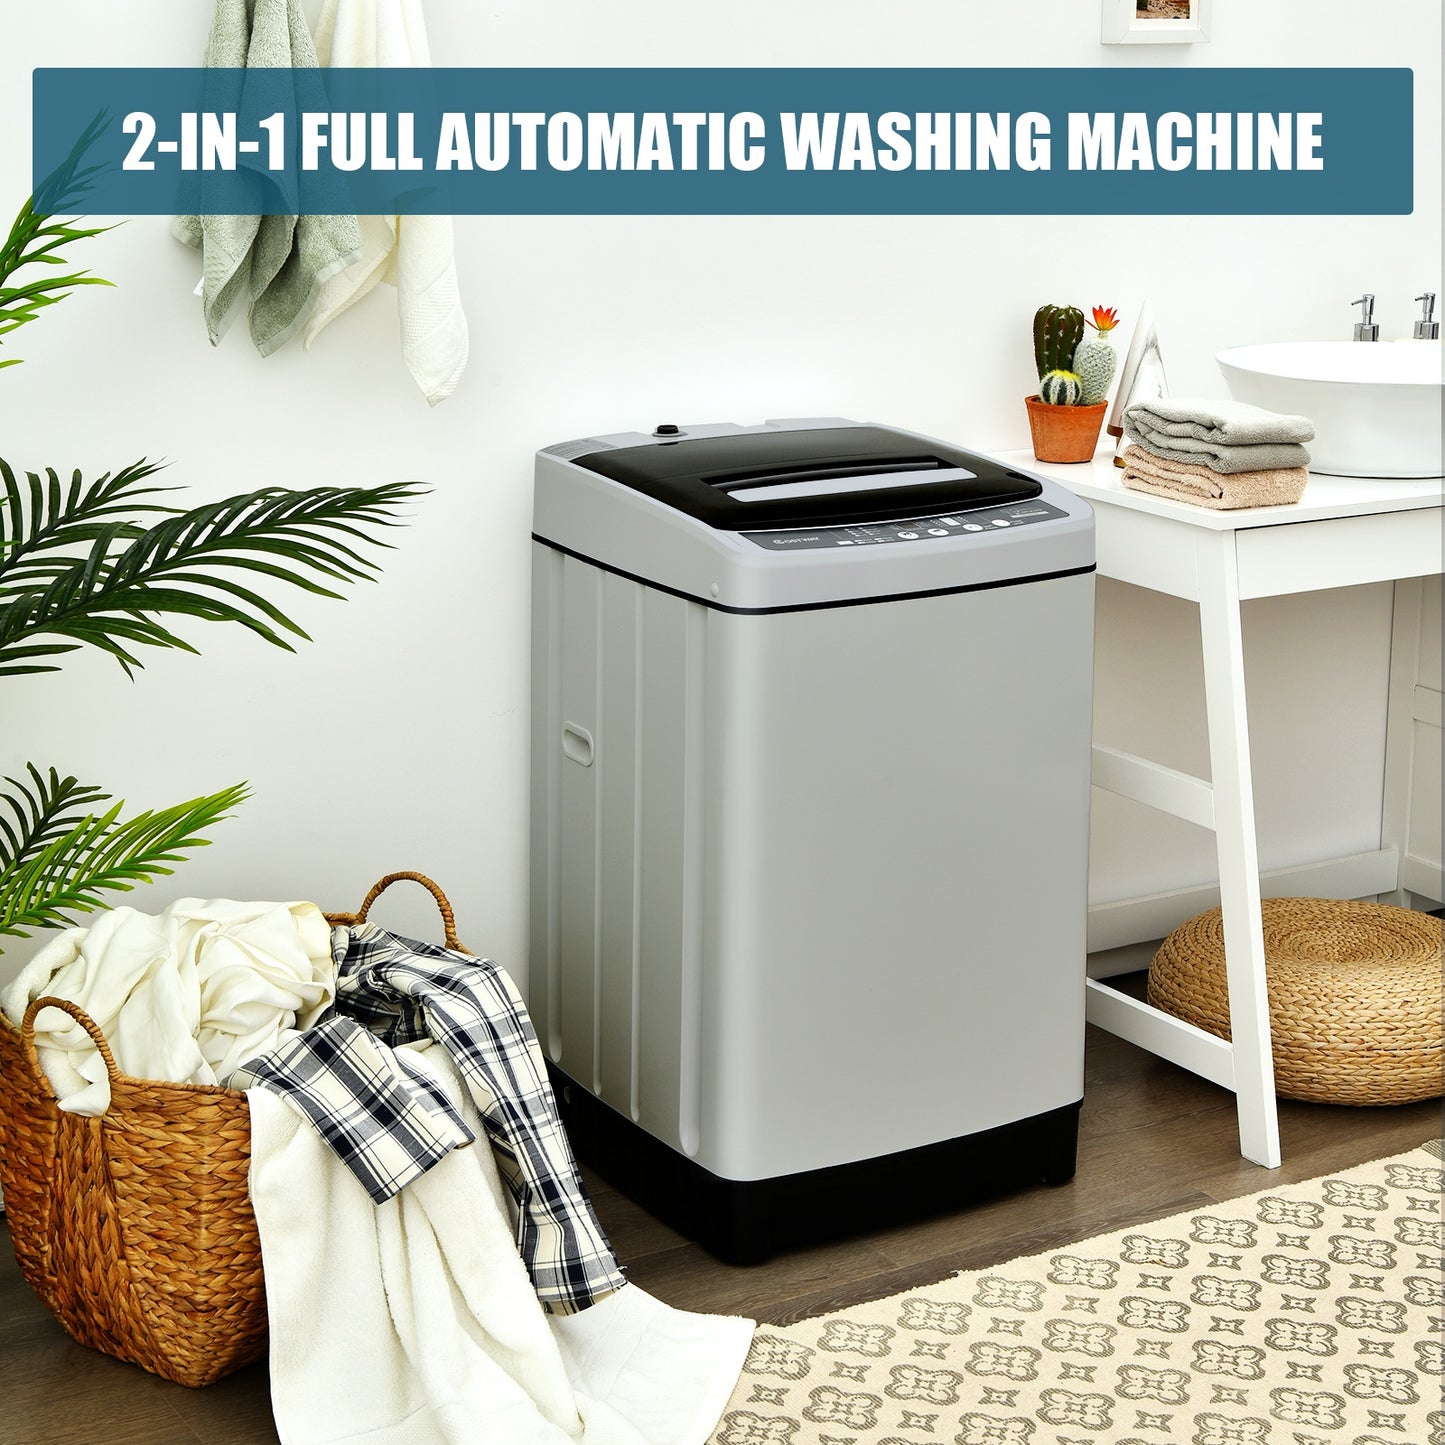 Full-Automatic Washing Machine 1.5 Cu.Ft 11 LBS Washer and Dryer-Gray